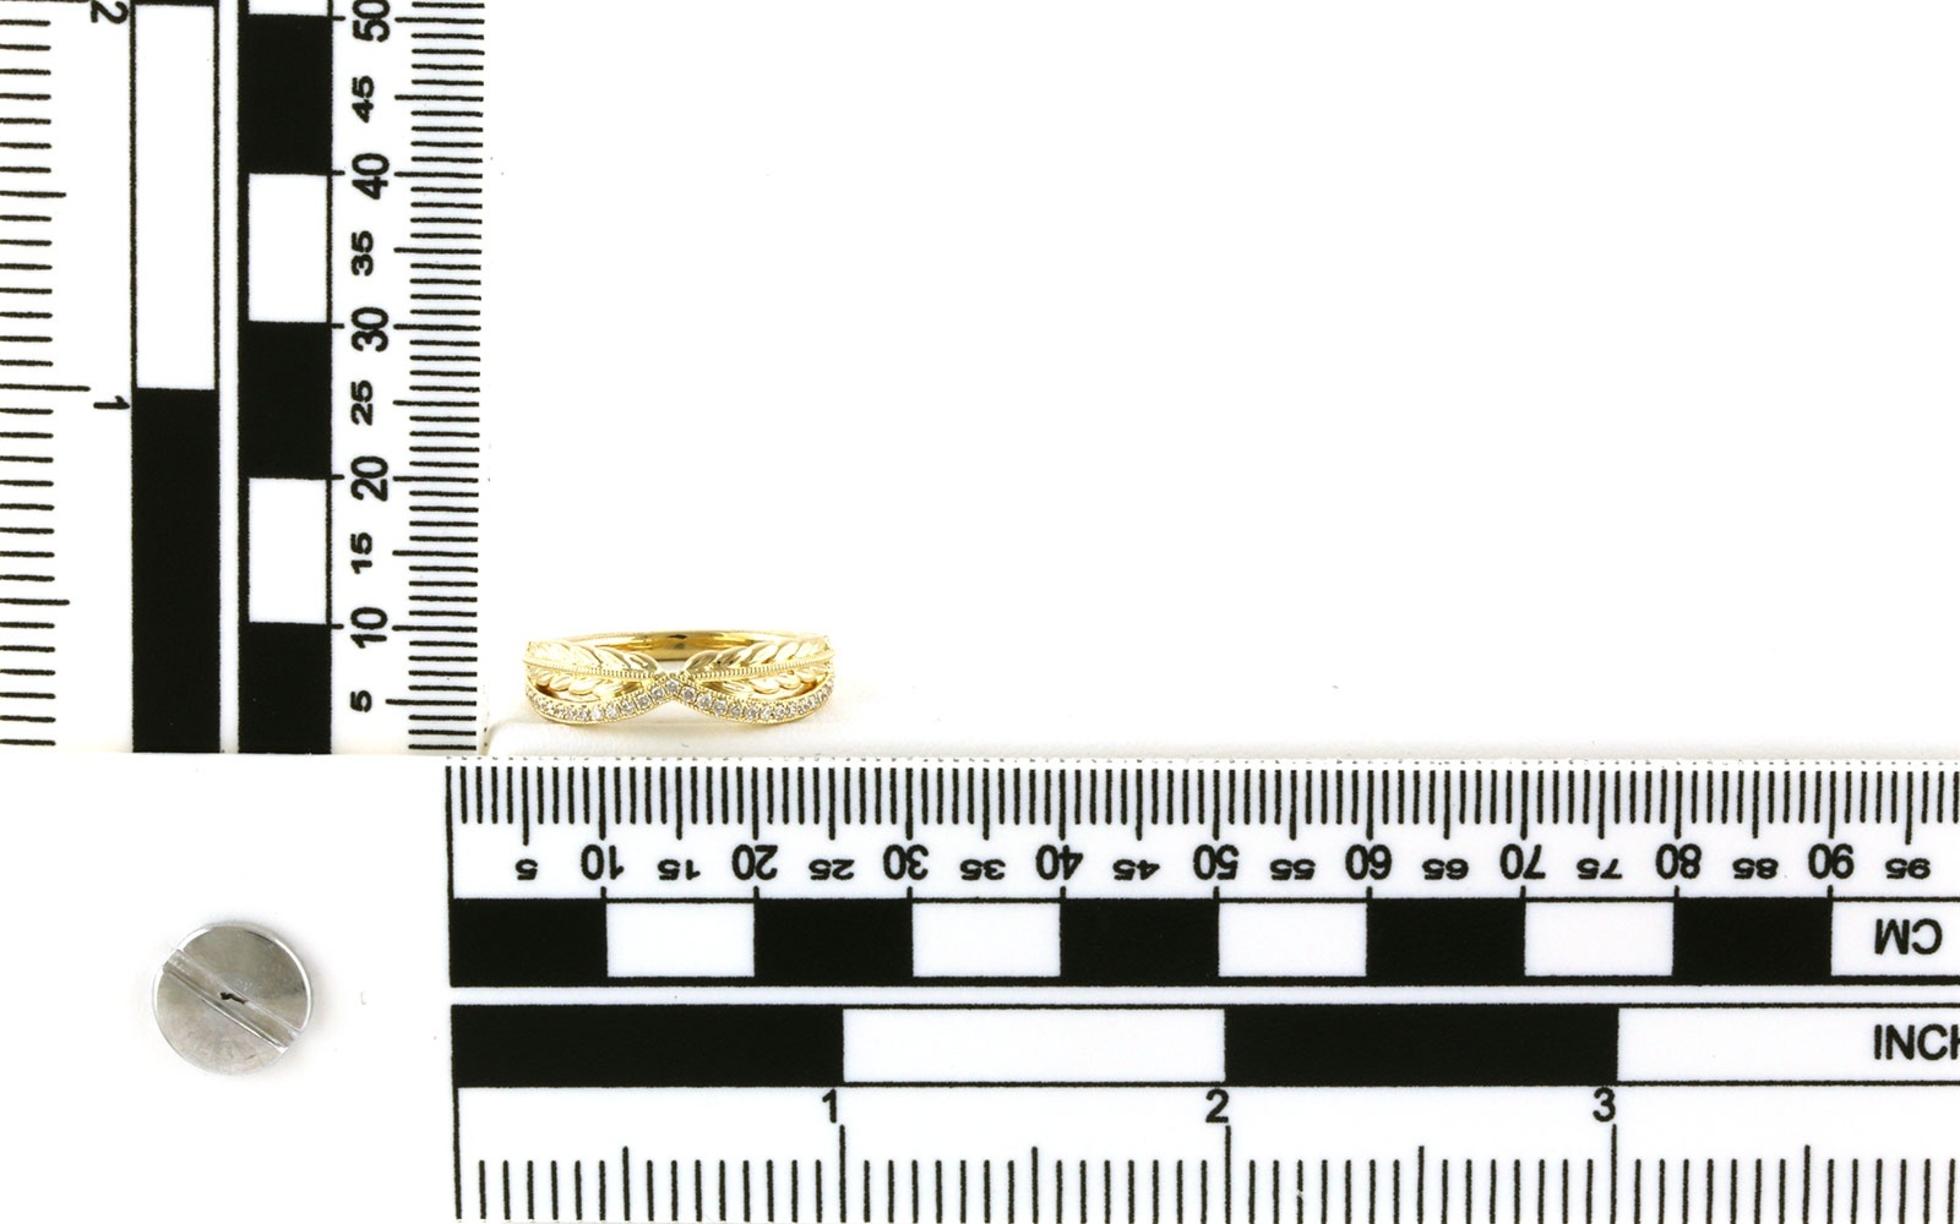 Leafy Milgrain Pave Diamond Band in Yellow Gold (0.13cts TWT) Scale